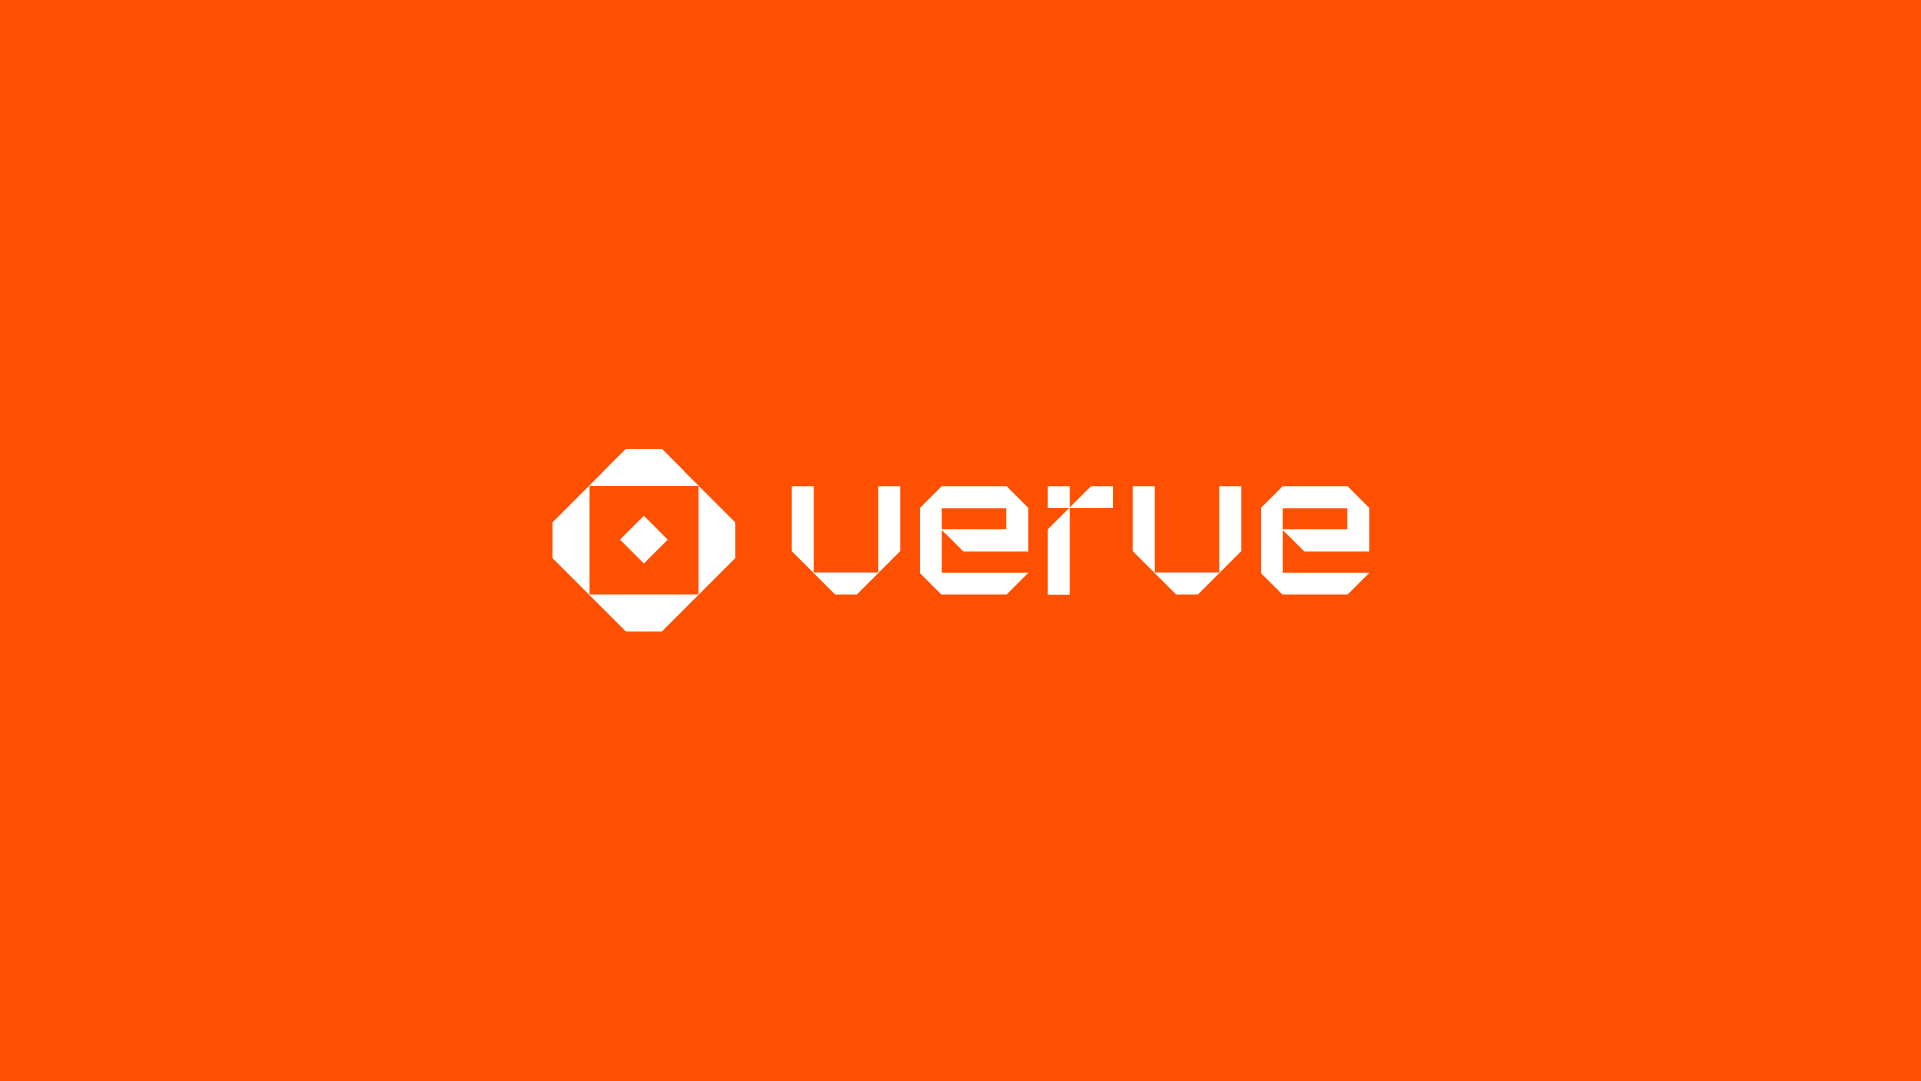 Verve Brand Identity – Feel the Power of Movement